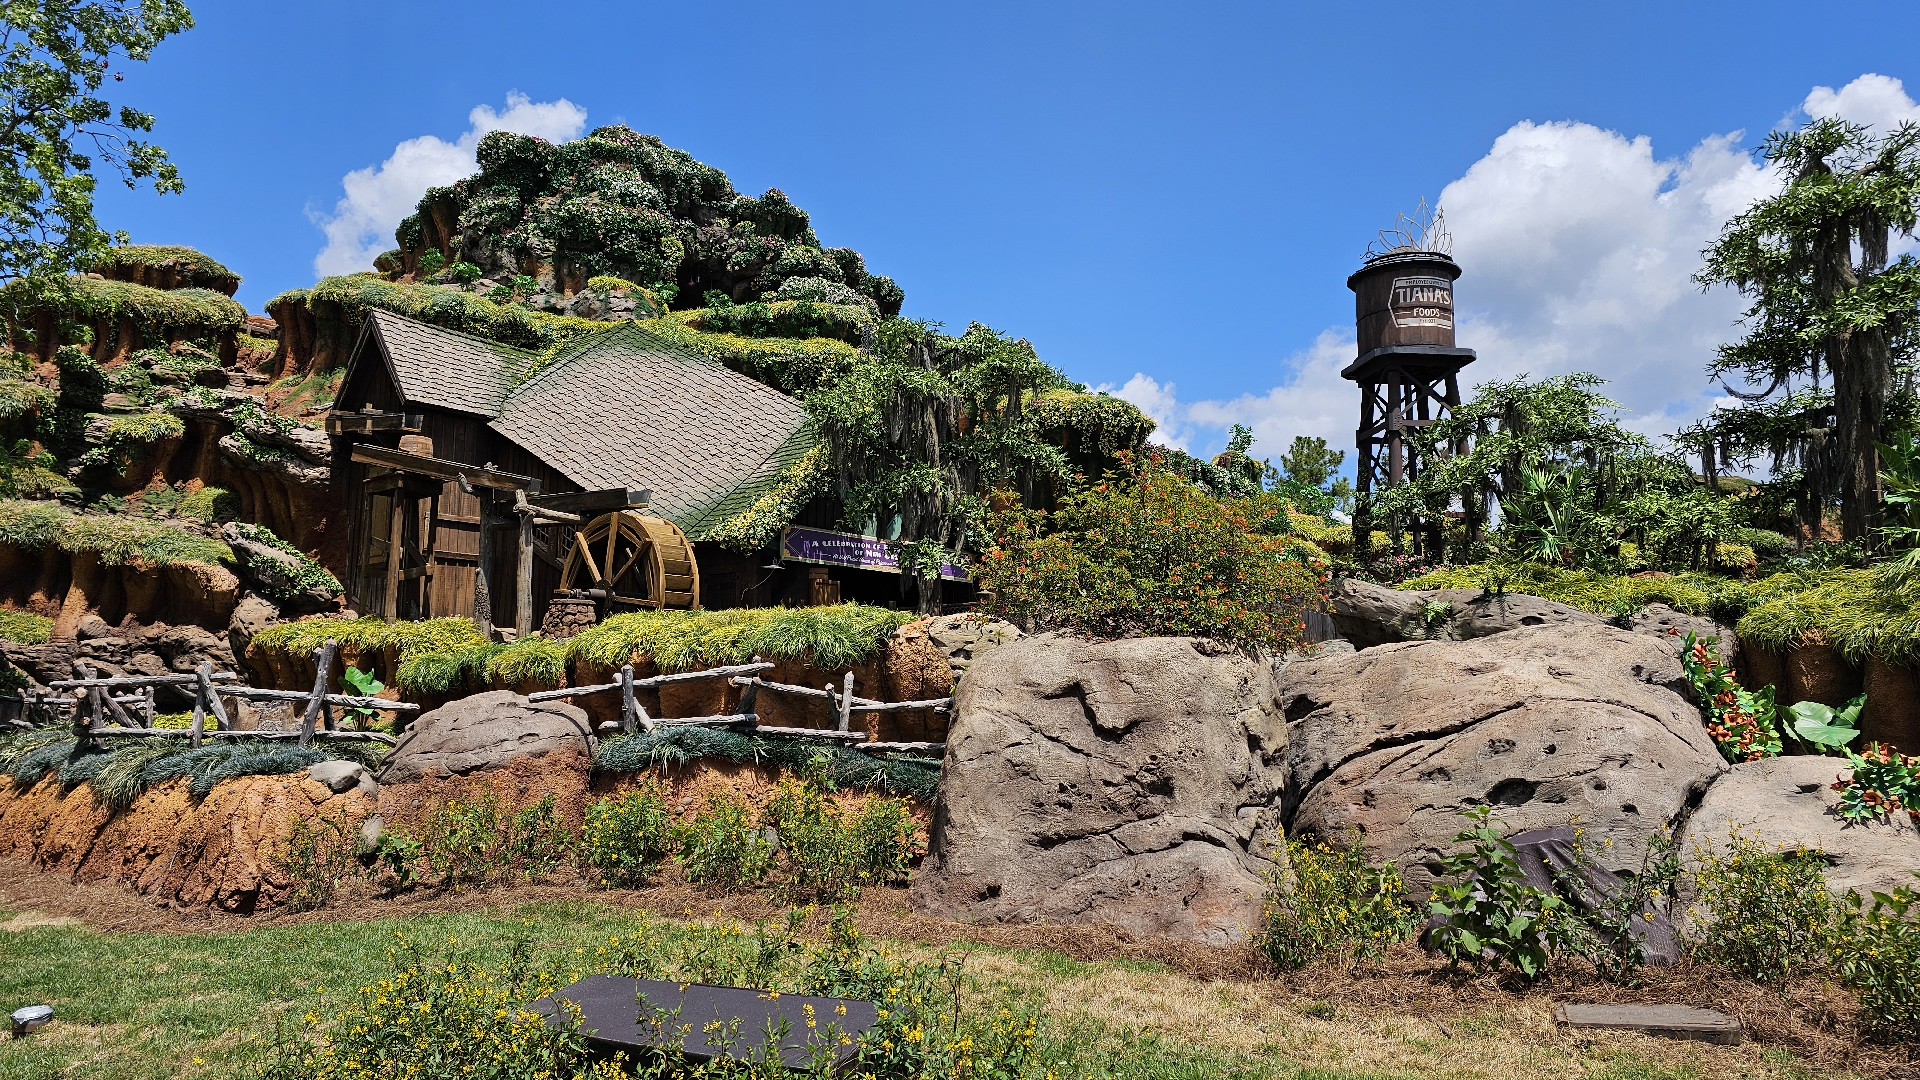 Exterior of Tiana's Bayou Adventure. Greenery and rocks cover a large hill, and there is a brown water tower in the background.